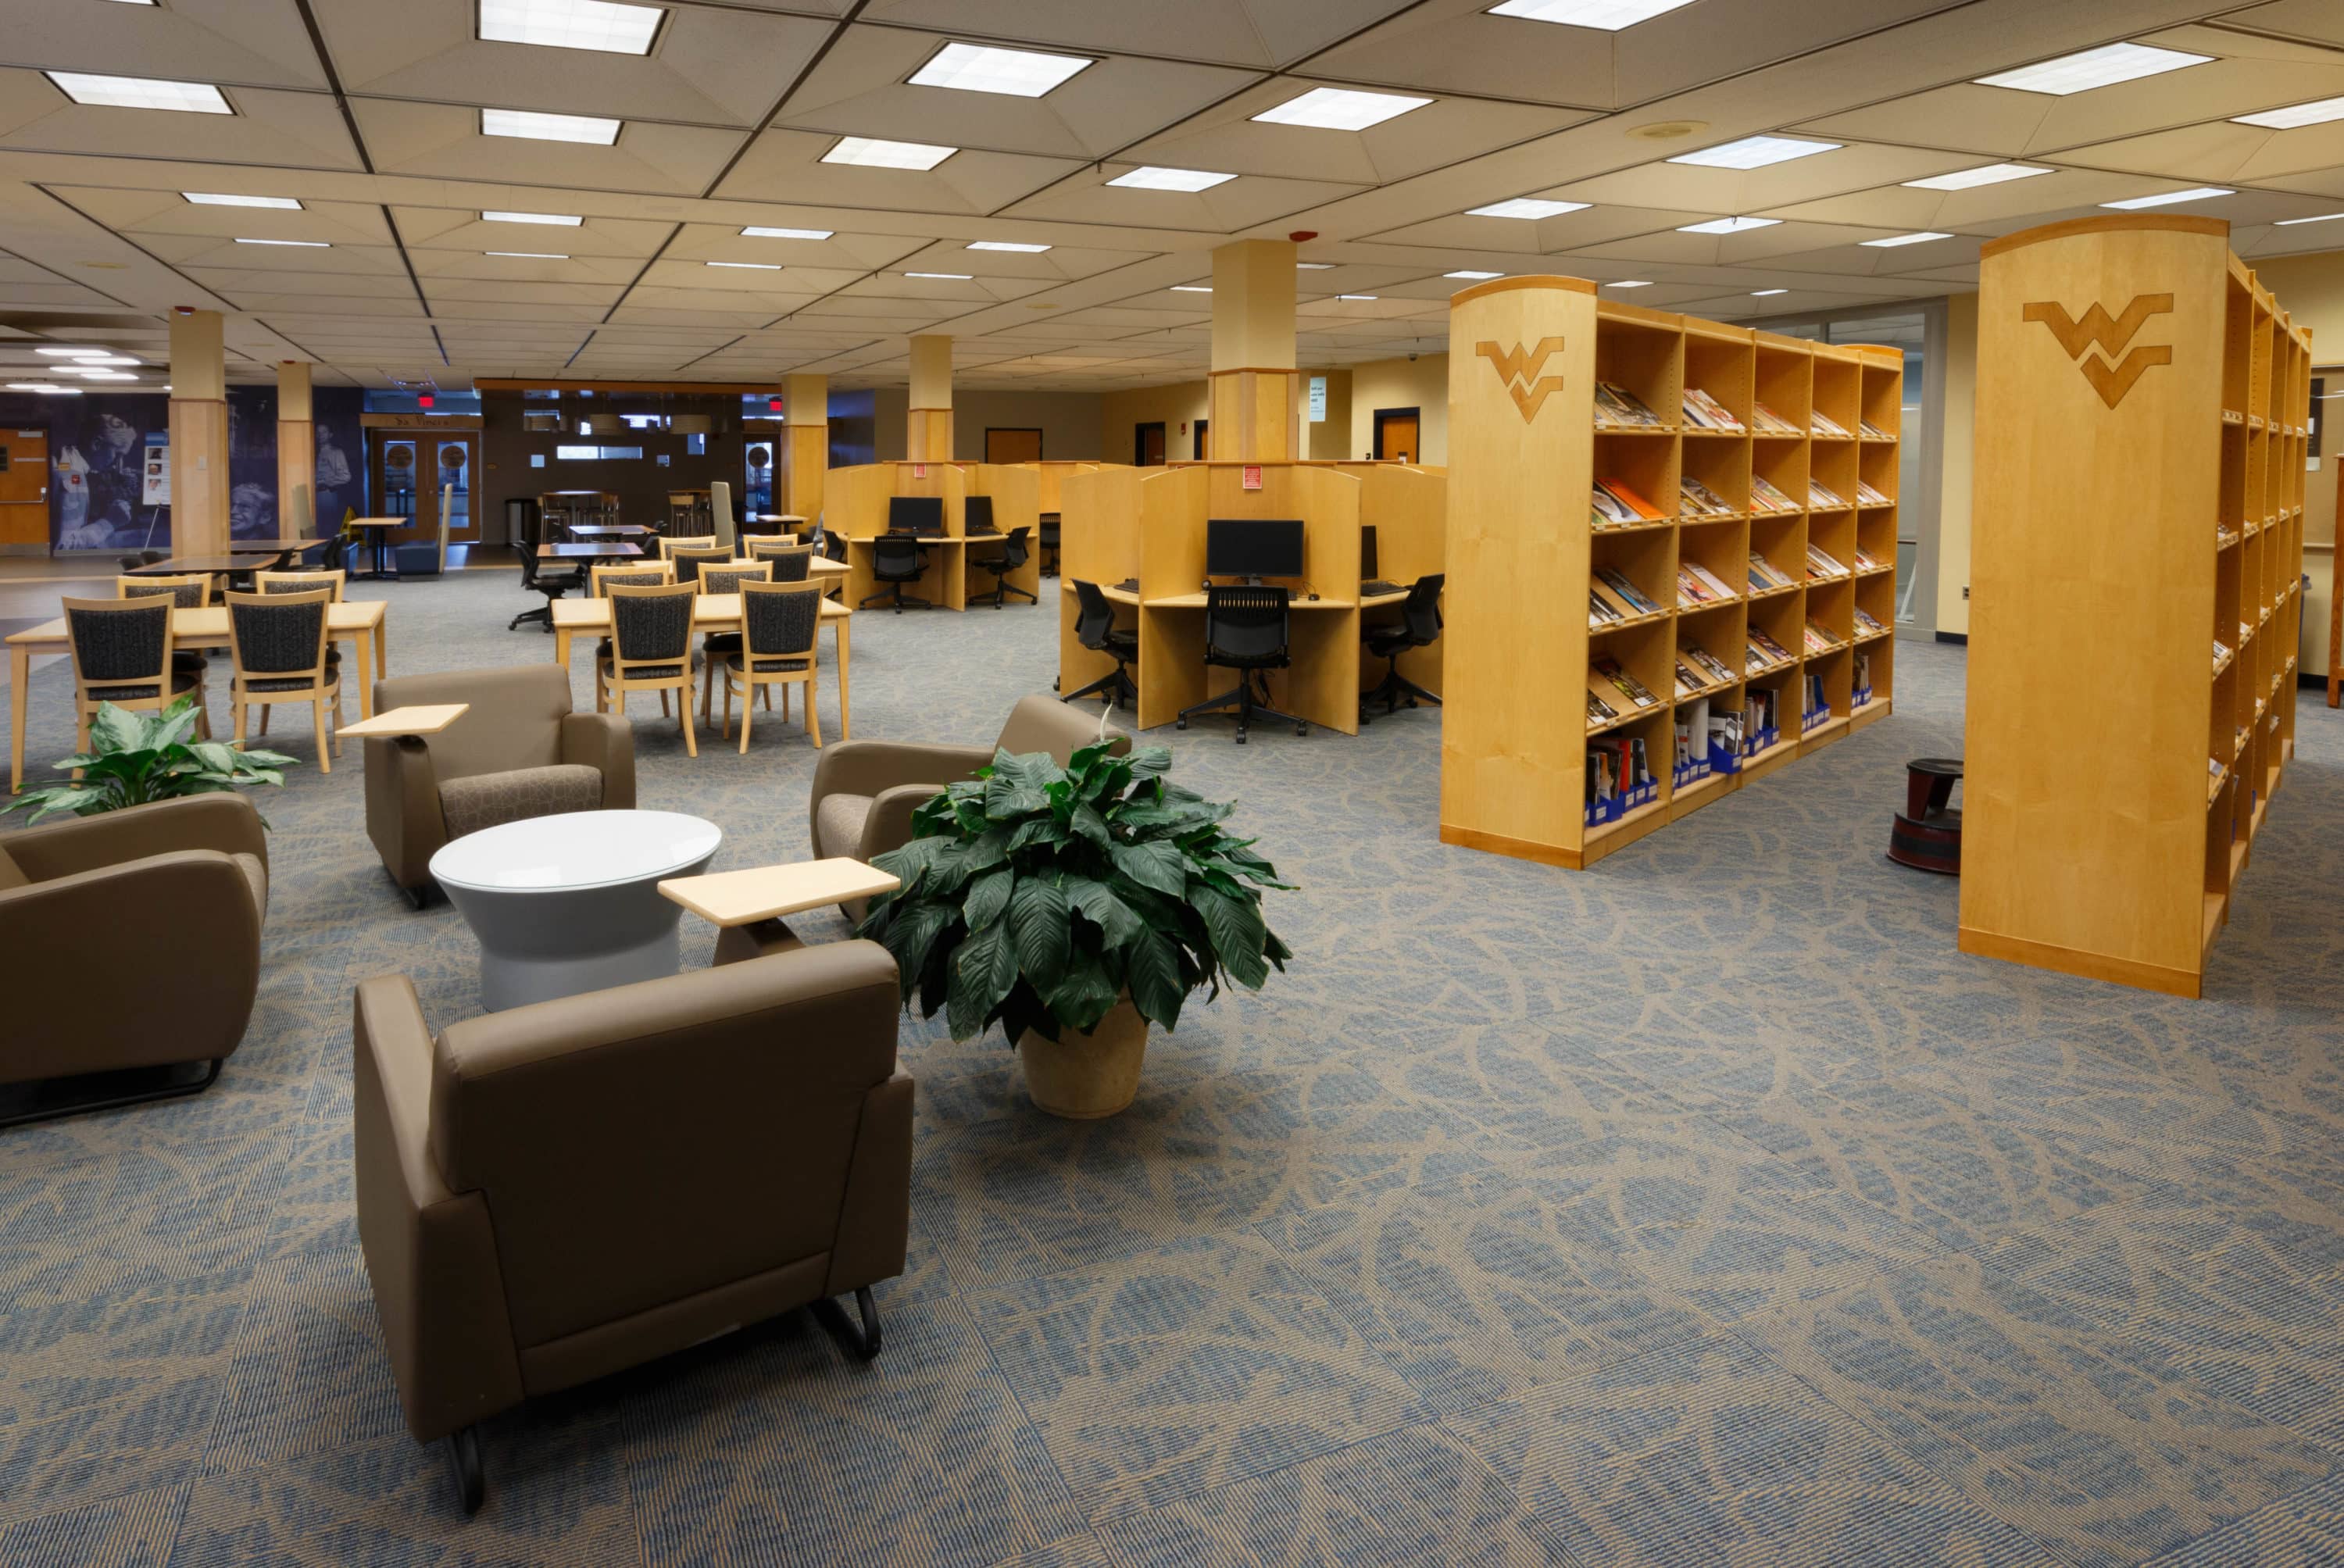 evansdale library